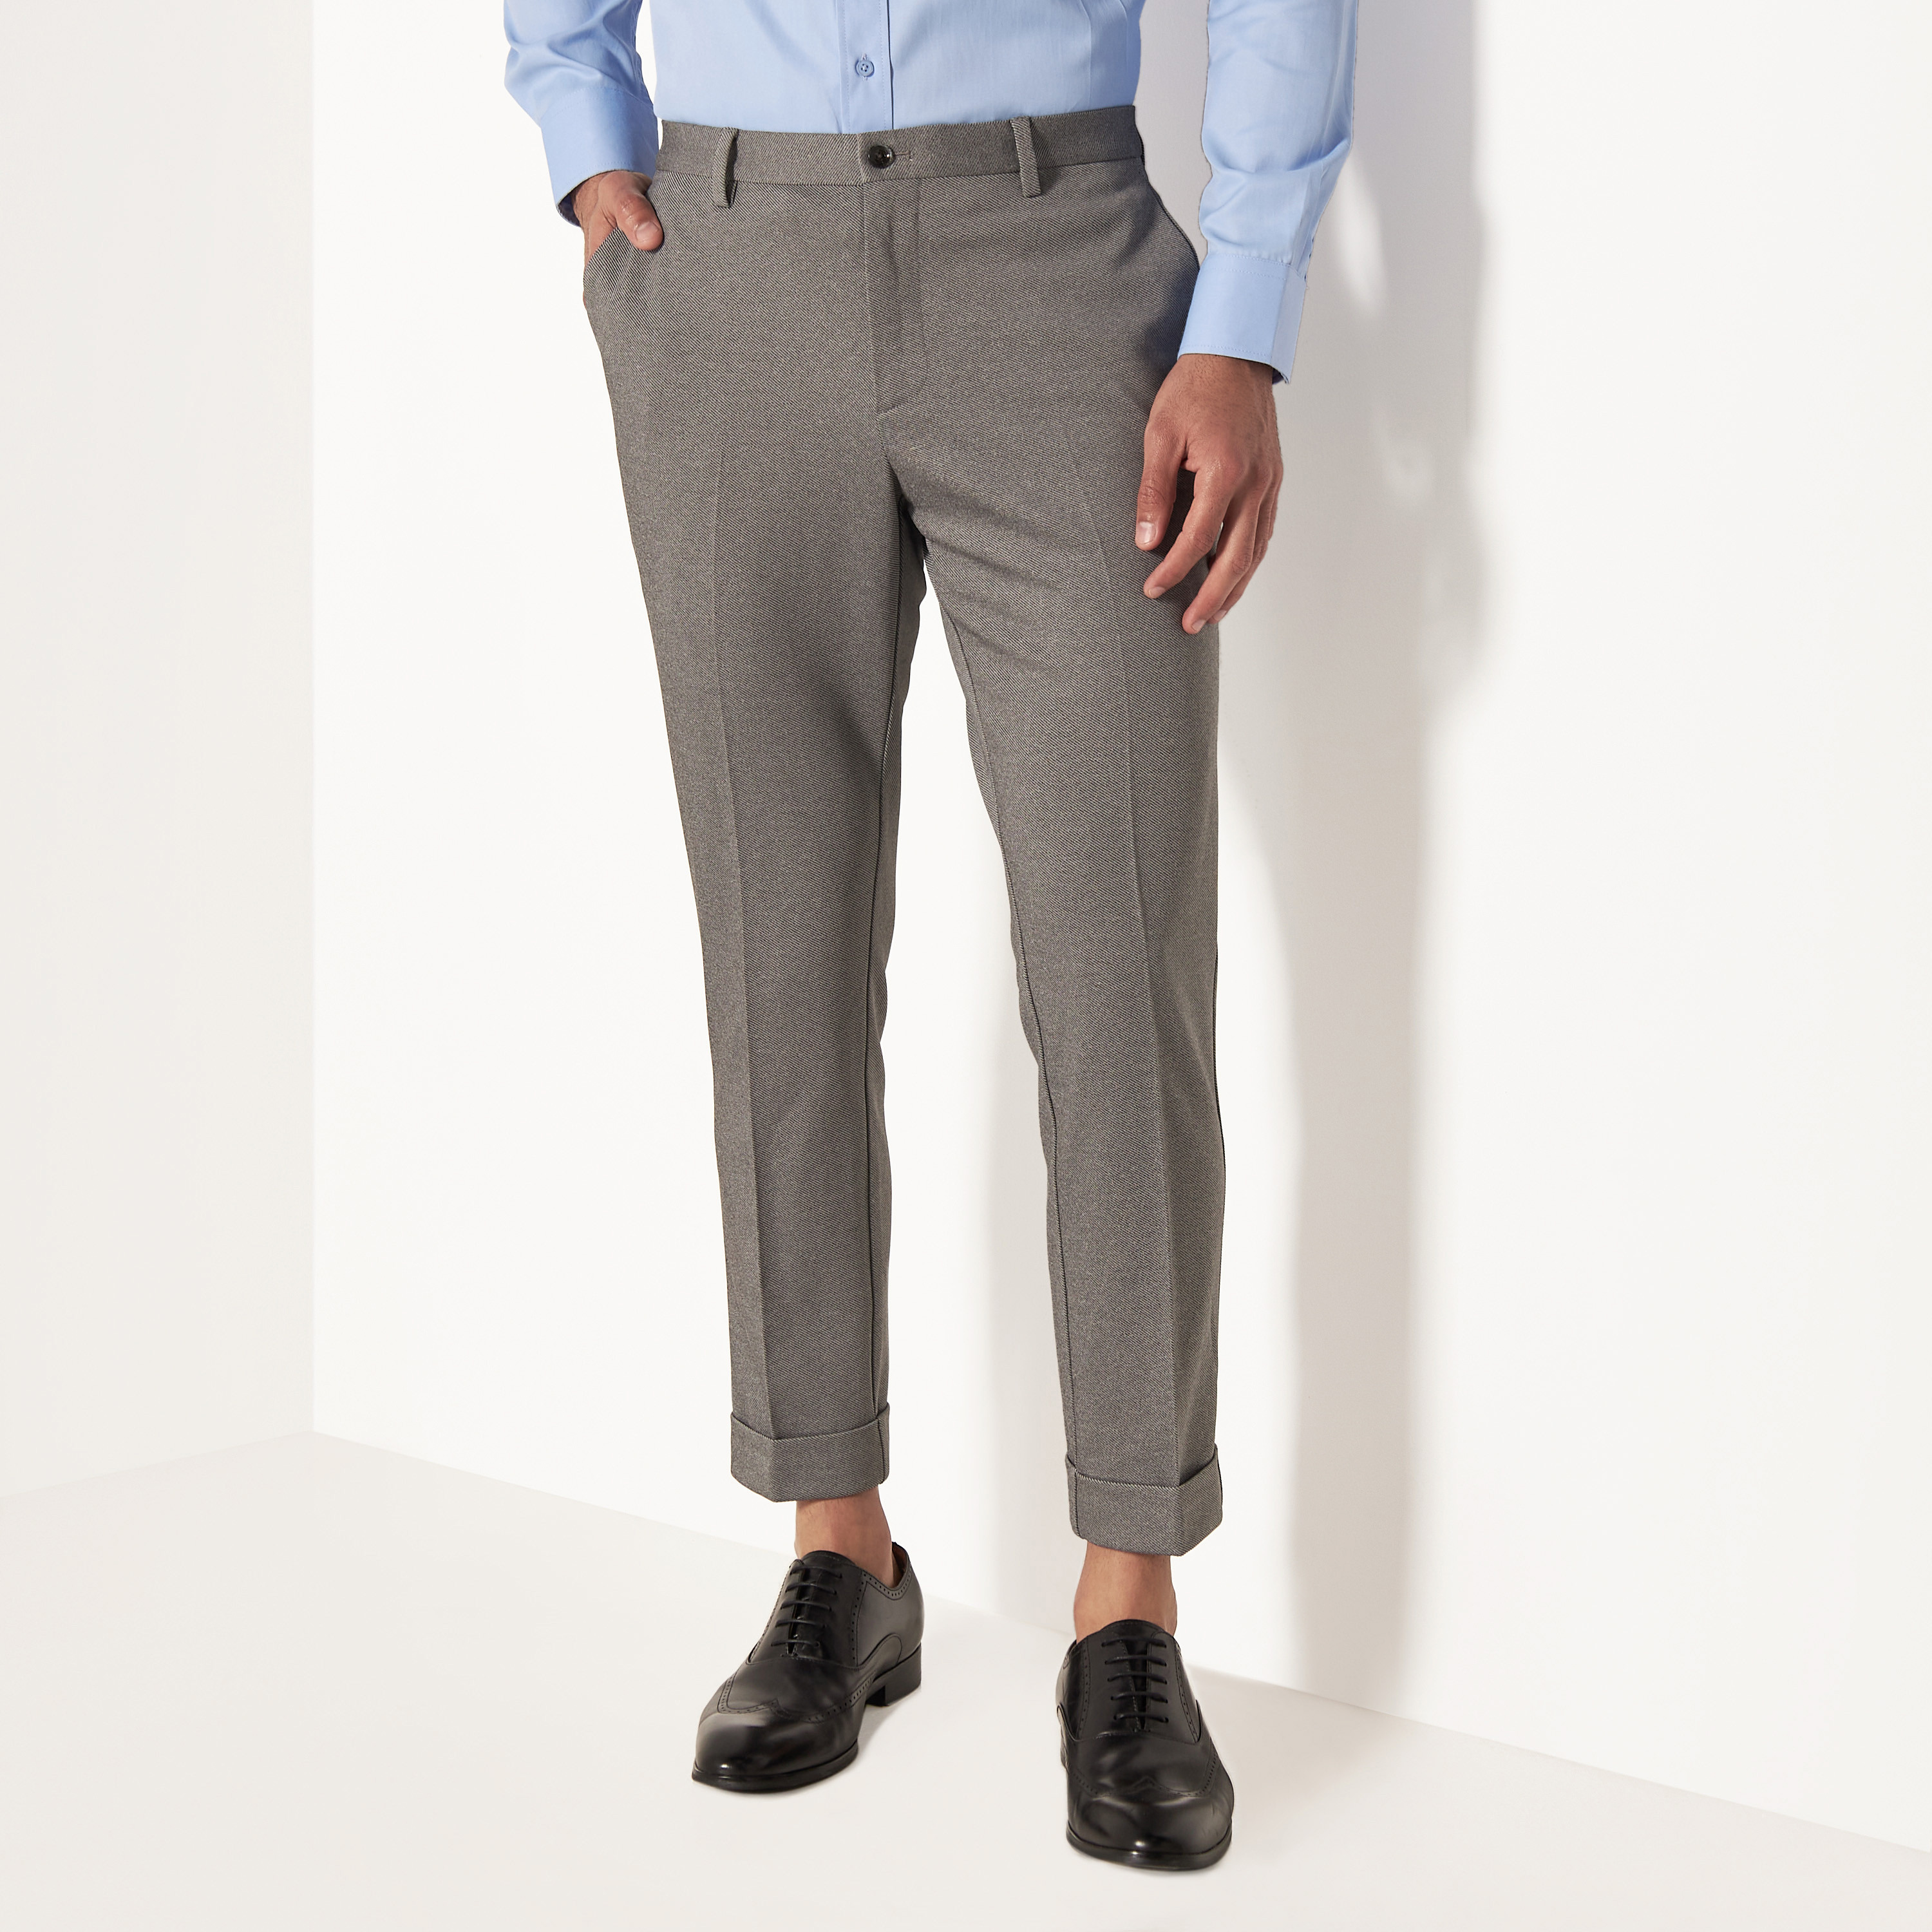 Buy Formal Trouser For Men Or Boys Online In India At Discounted Prices